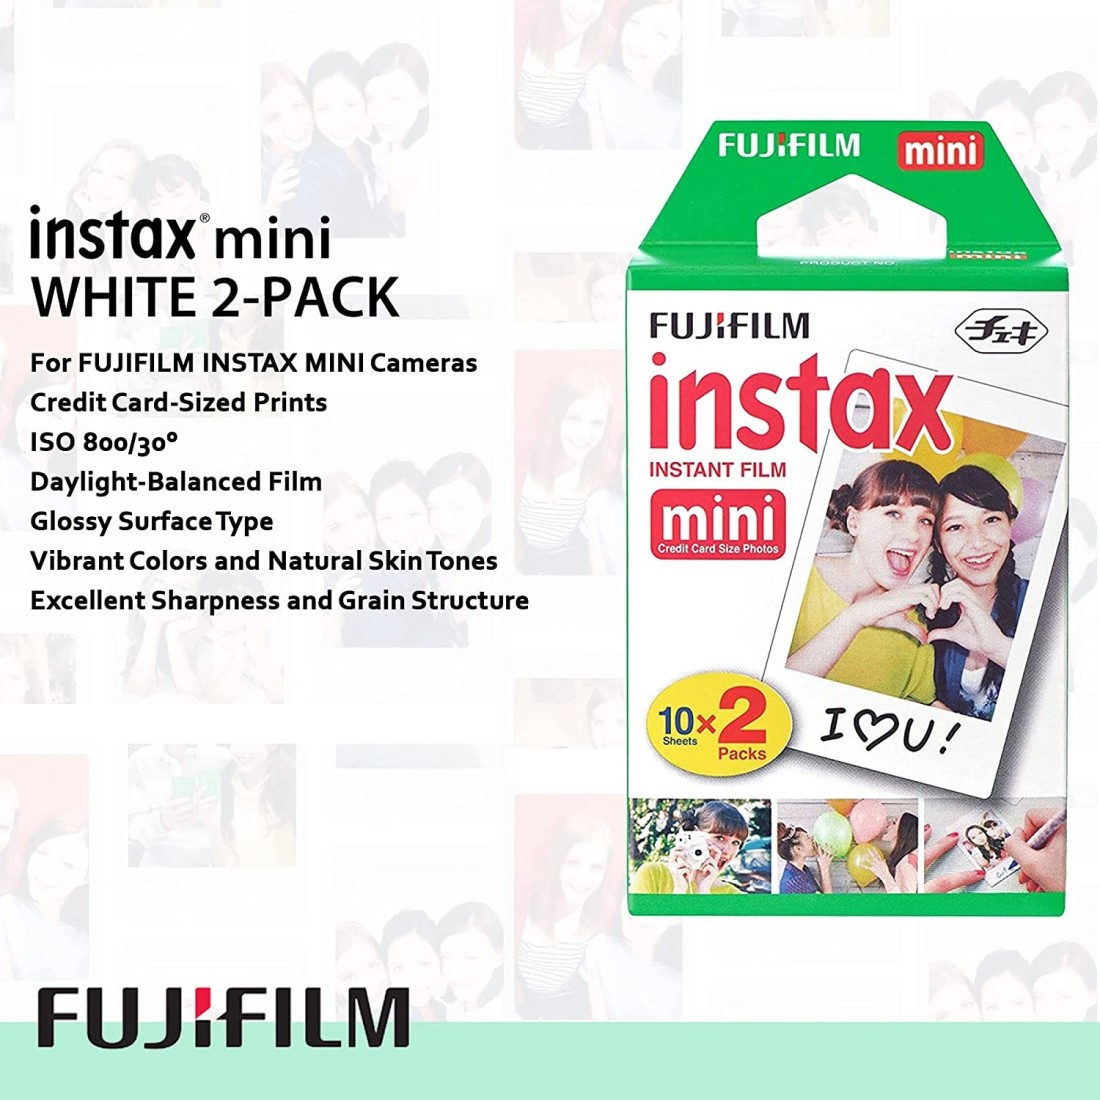 Instax Mini 12 Instant Camera, Blossom Pink, Bundle with 10 Shots of Film,  5 Heart Photo Clips, Stickers & Hanging Twine with LED Lights